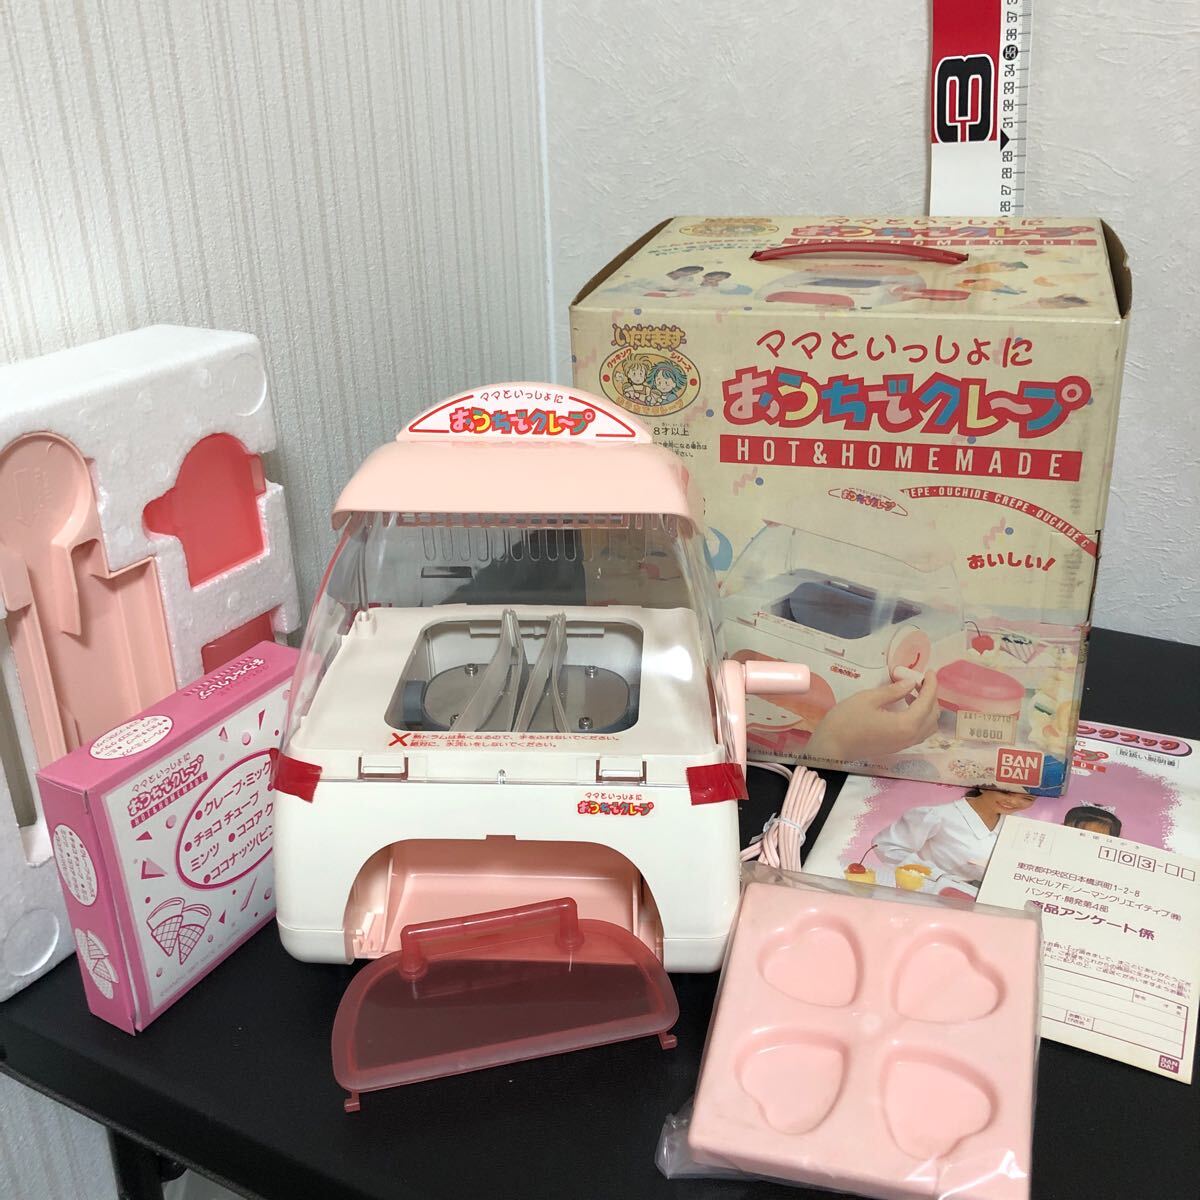 *① mama .......... crepe receive cooking series Bandai retro toy toy that time thing 1987 year 